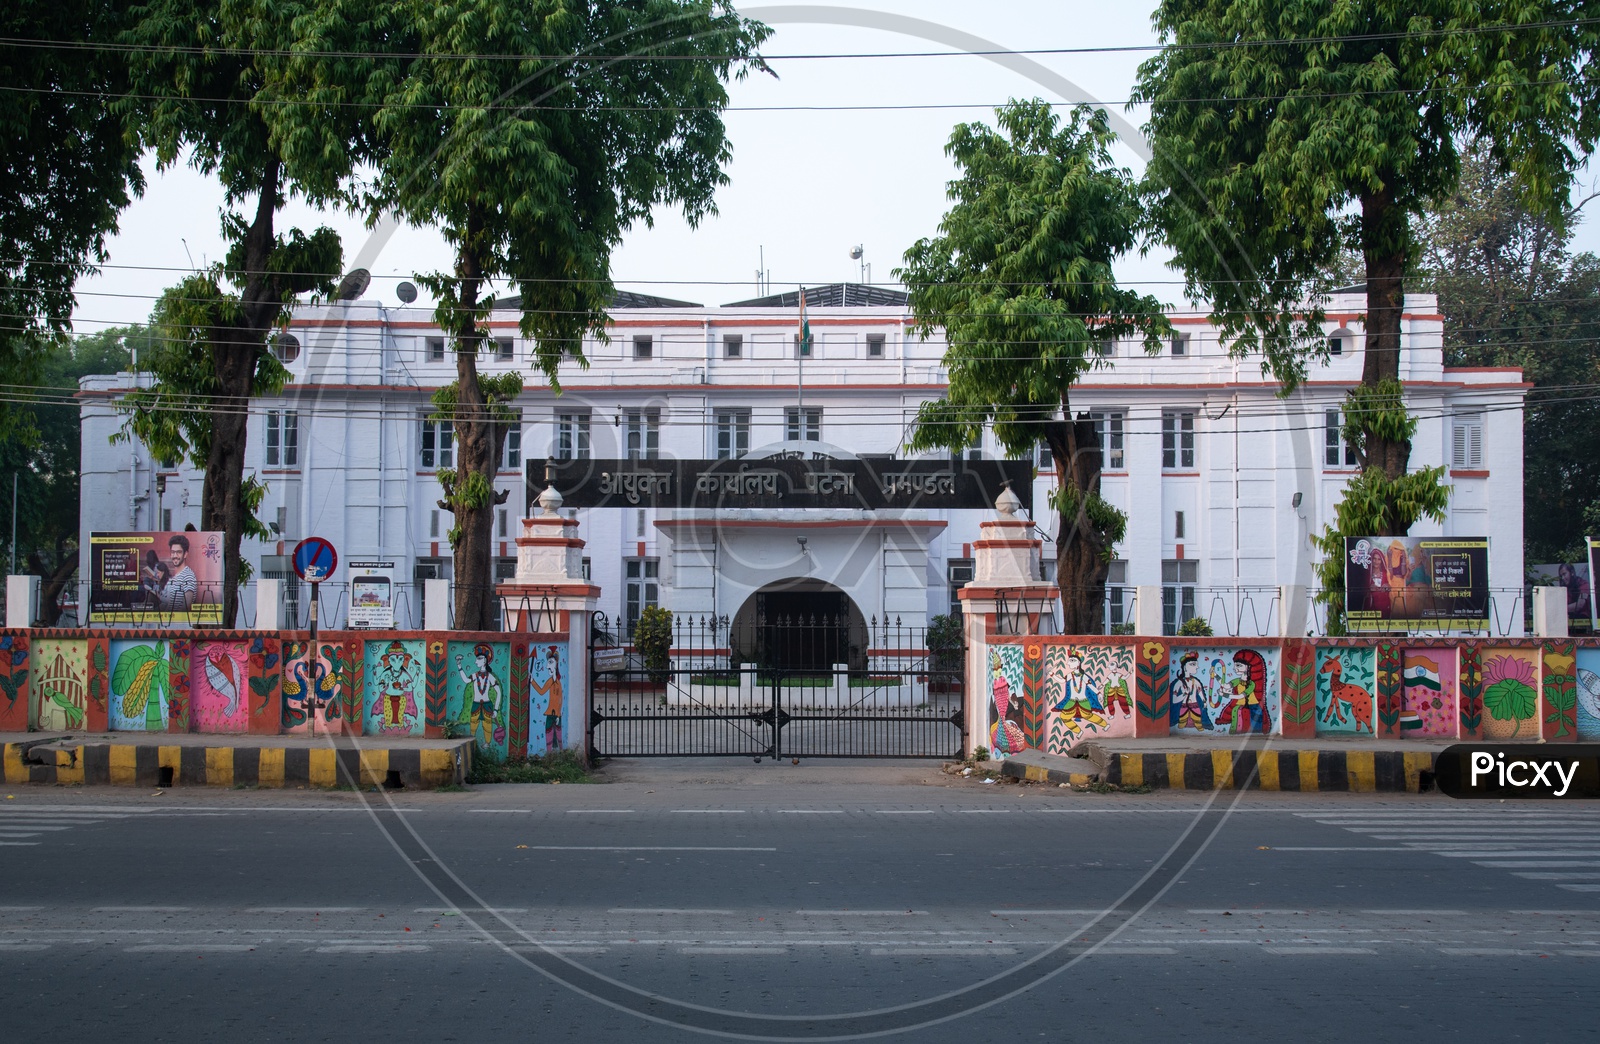 Office  Of The Commissioner  Patna City